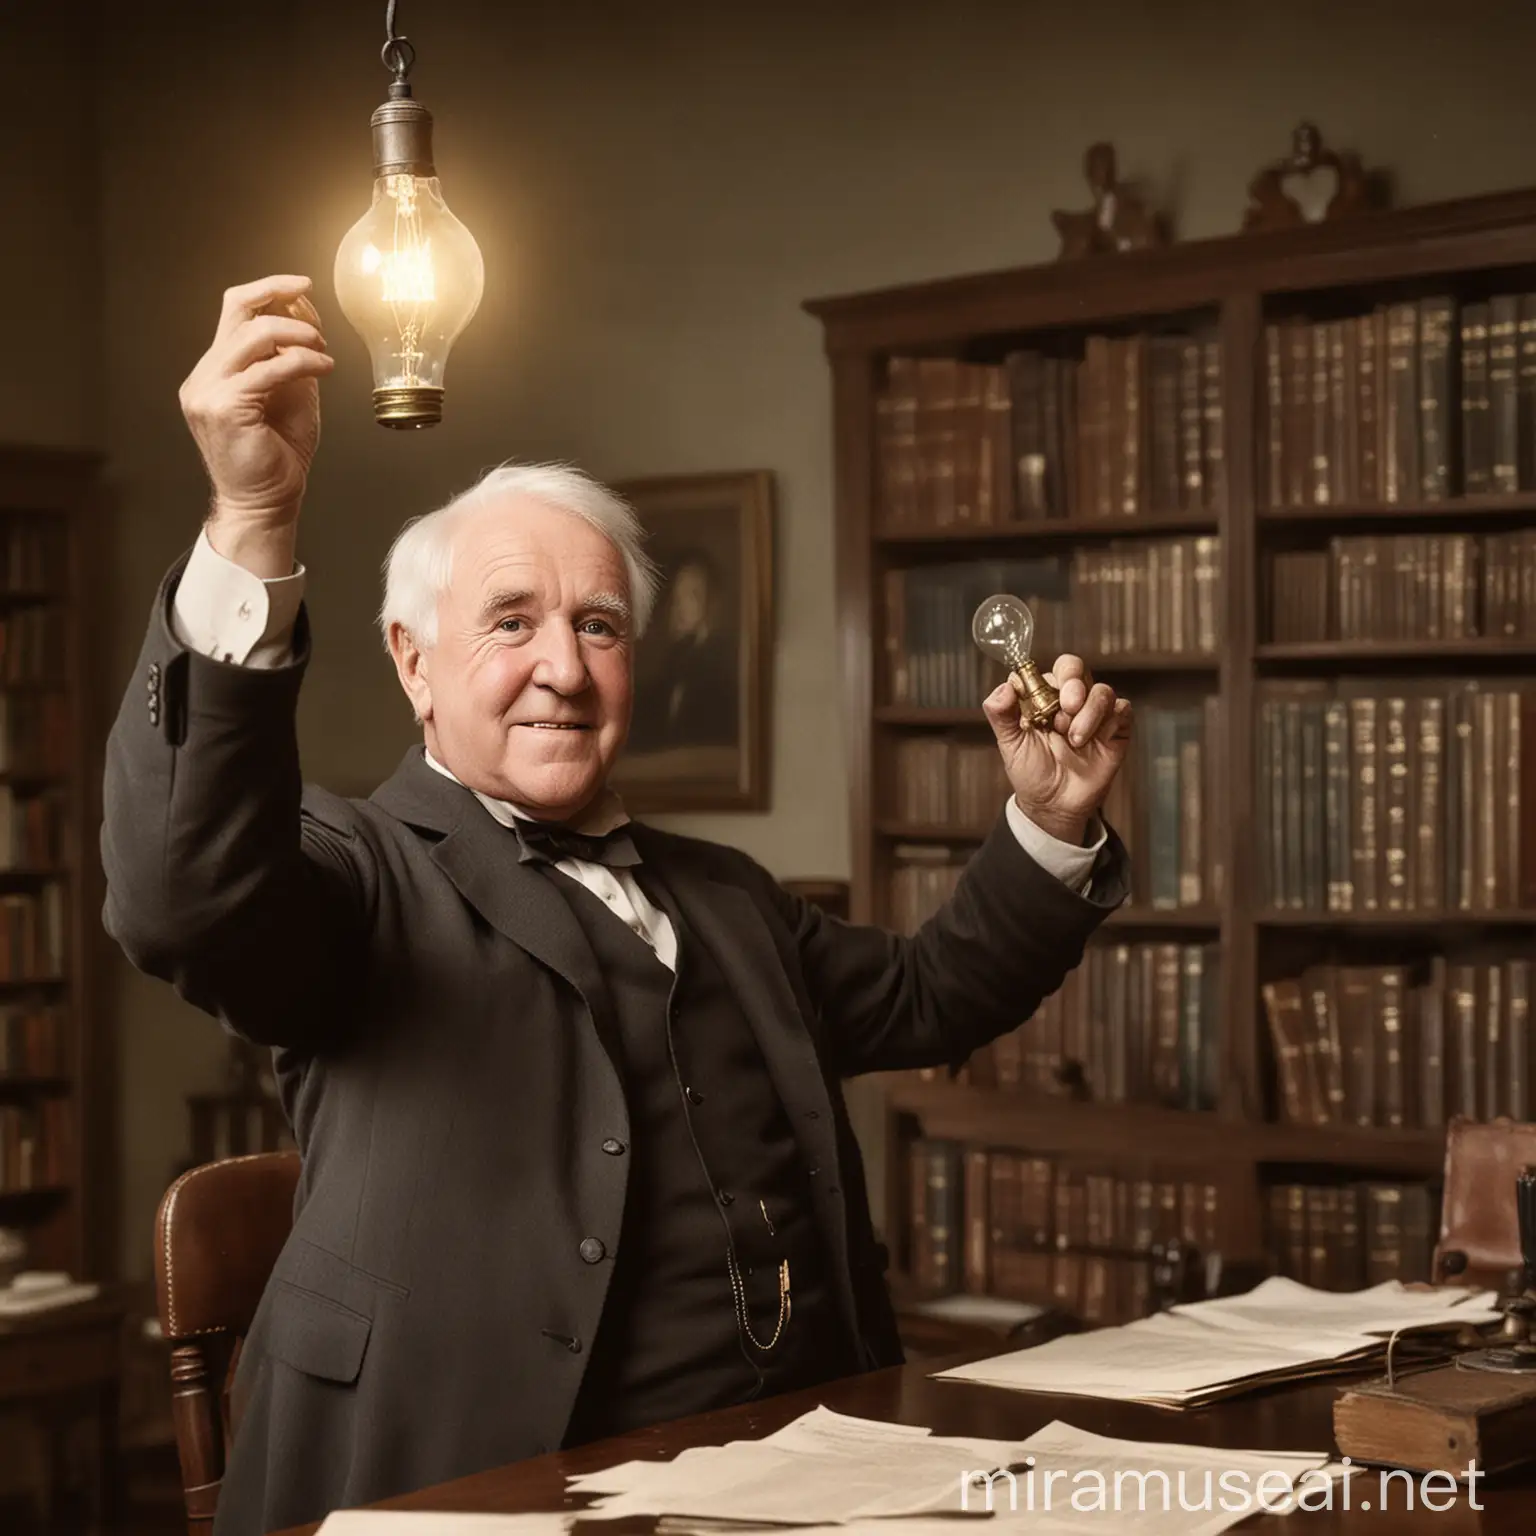 Thomas Edison Cheerfully Displaying a Lightbulb in His Office